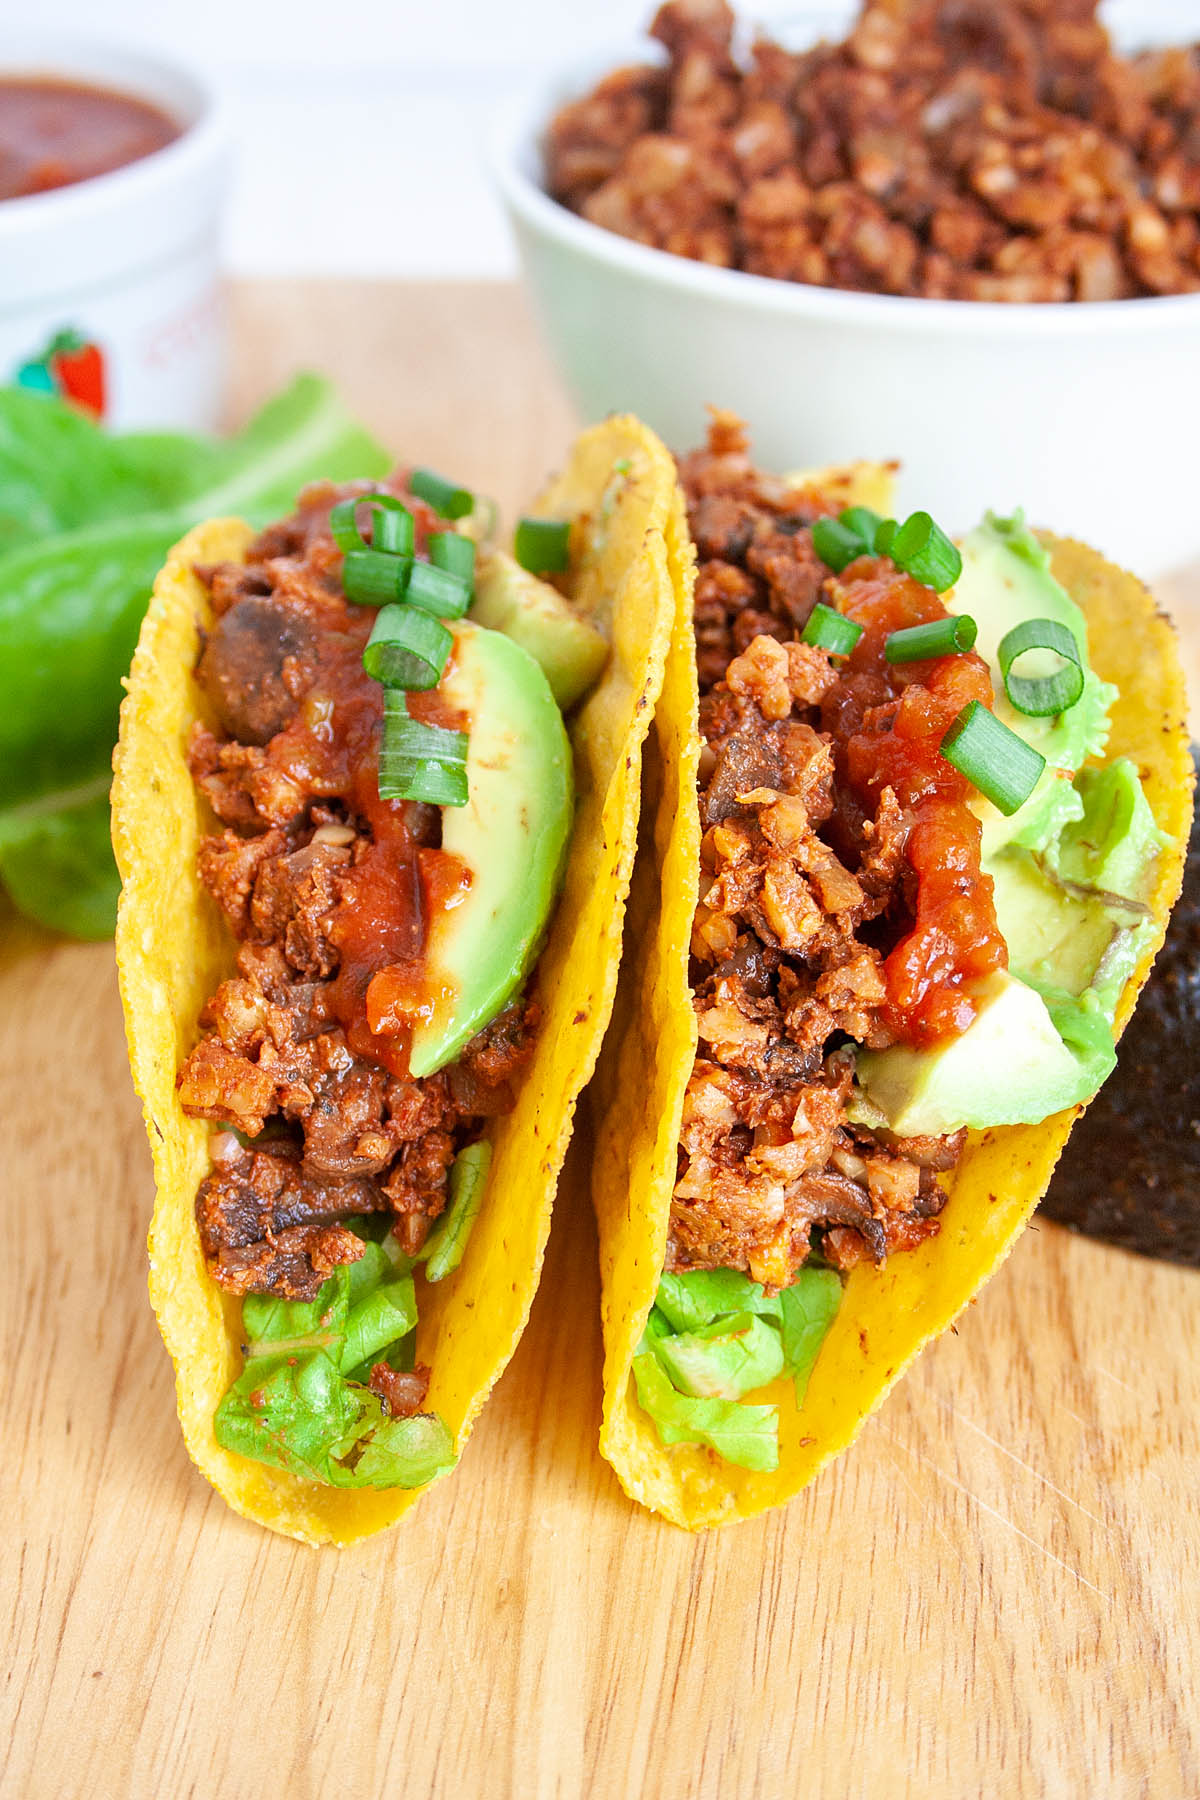 Walnut Taco Meat in two tacos on a cutting board.